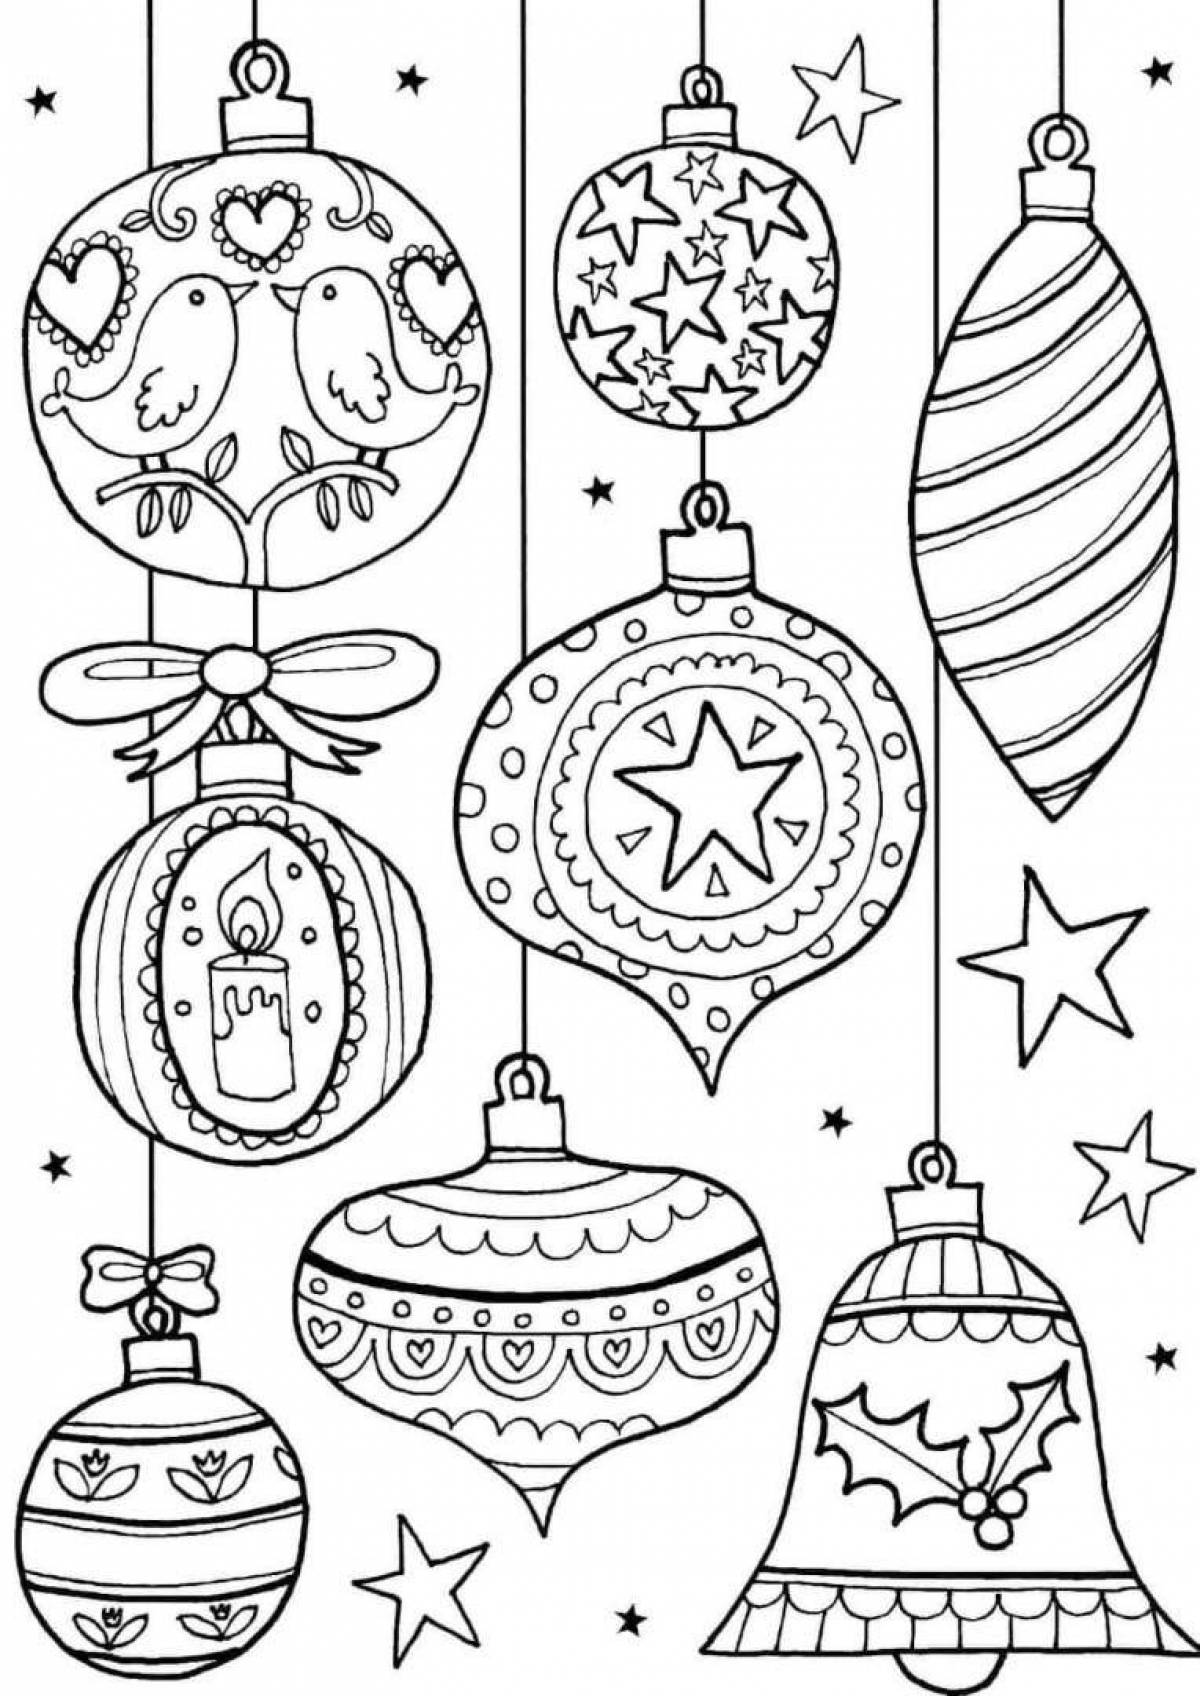 Glowing Christmas toy ball coloring page